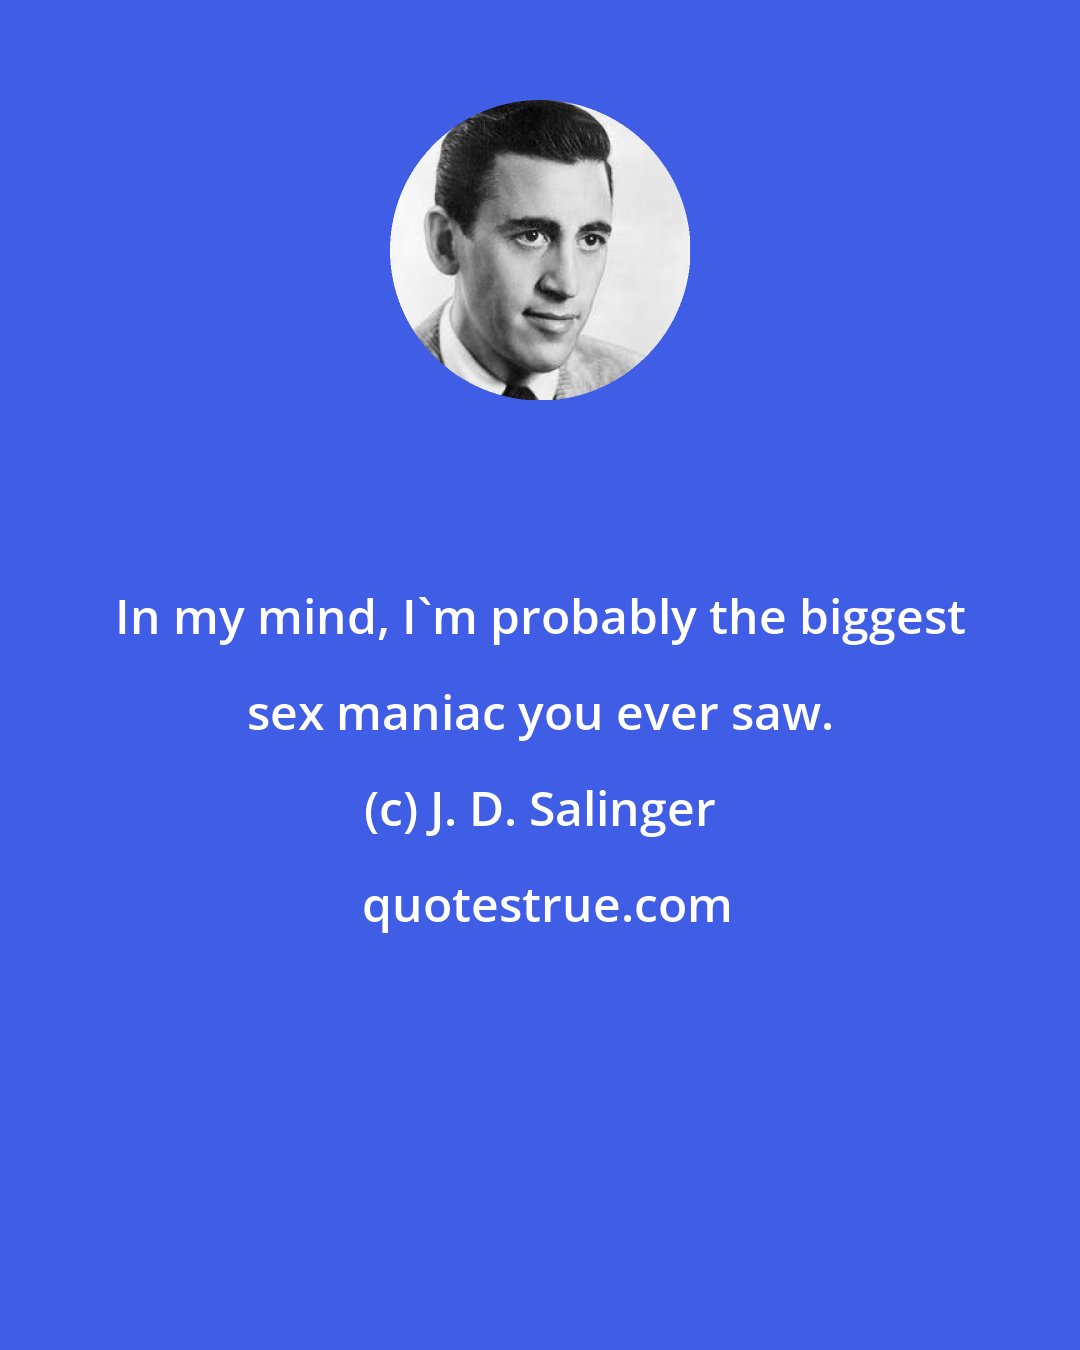 J. D. Salinger: In my mind, I'm probably the biggest sex maniac you ever saw.